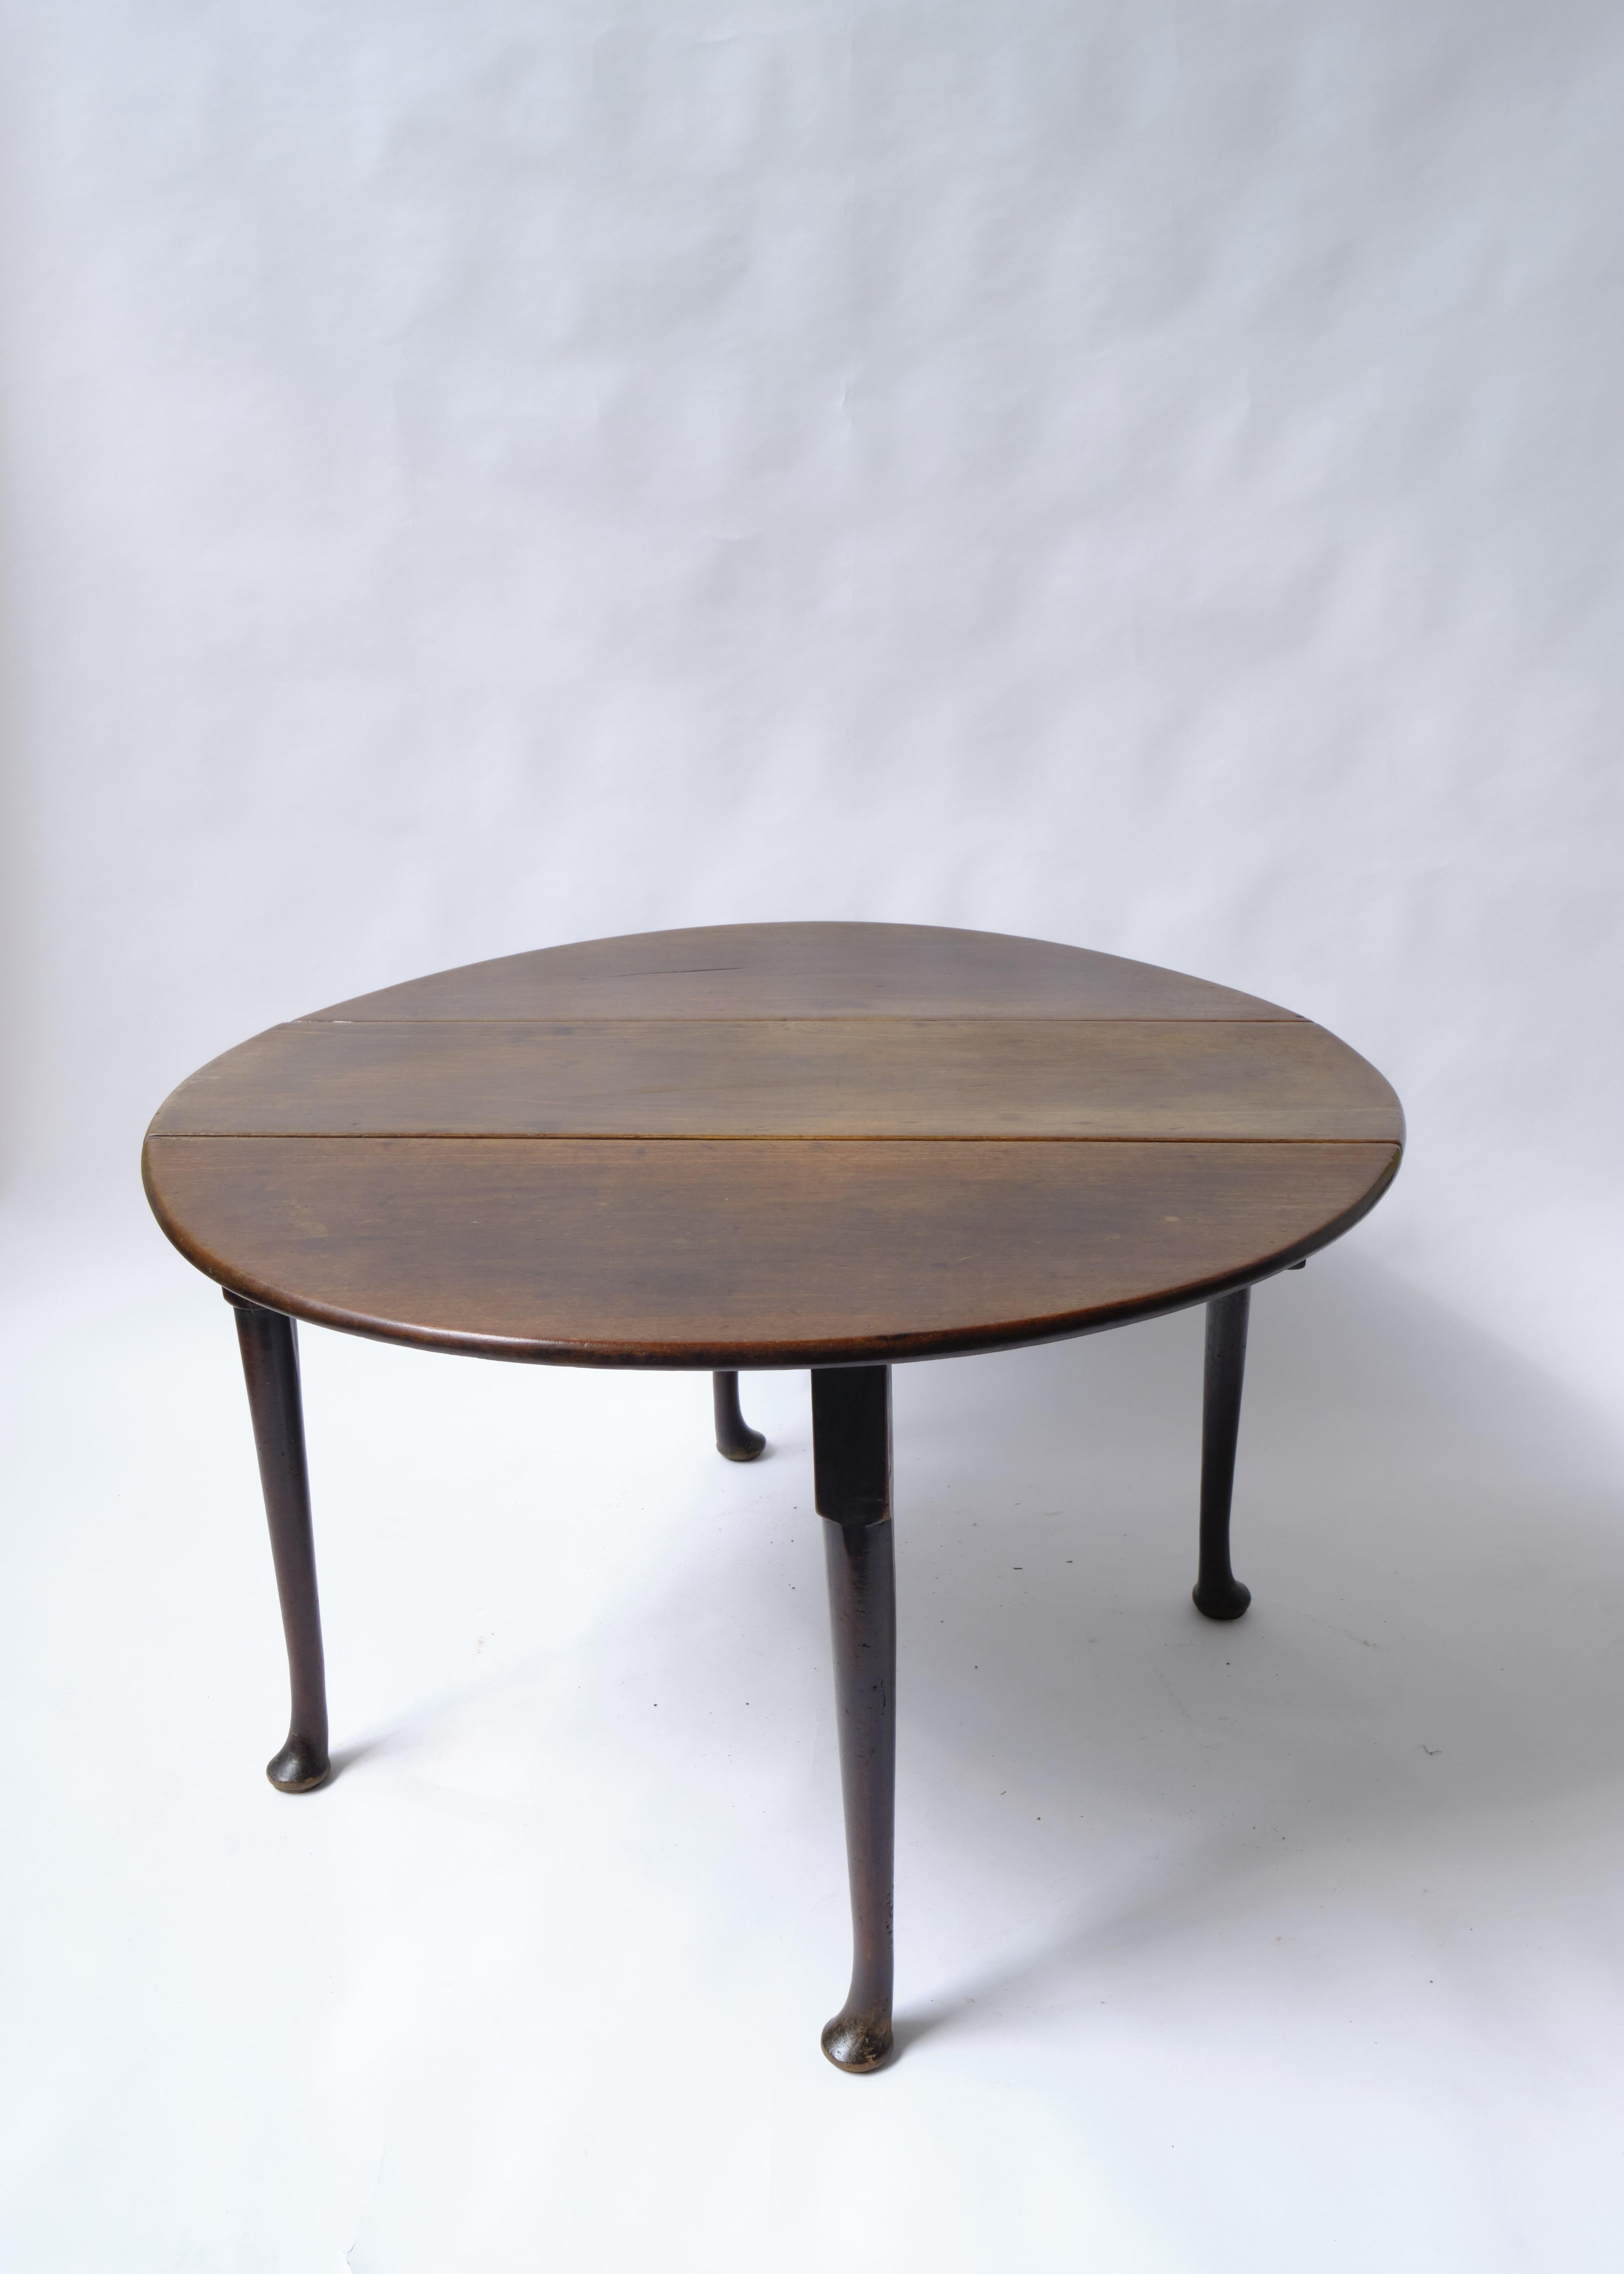 English, Circa 1760.

Oval Georgian drop leaf breakfast table.

With two drop leaf ends which lift up and are supported by hinged solid mahogany gate-legs to create a good sized slightly oval shape table top, which can accommodate 4-6 seated